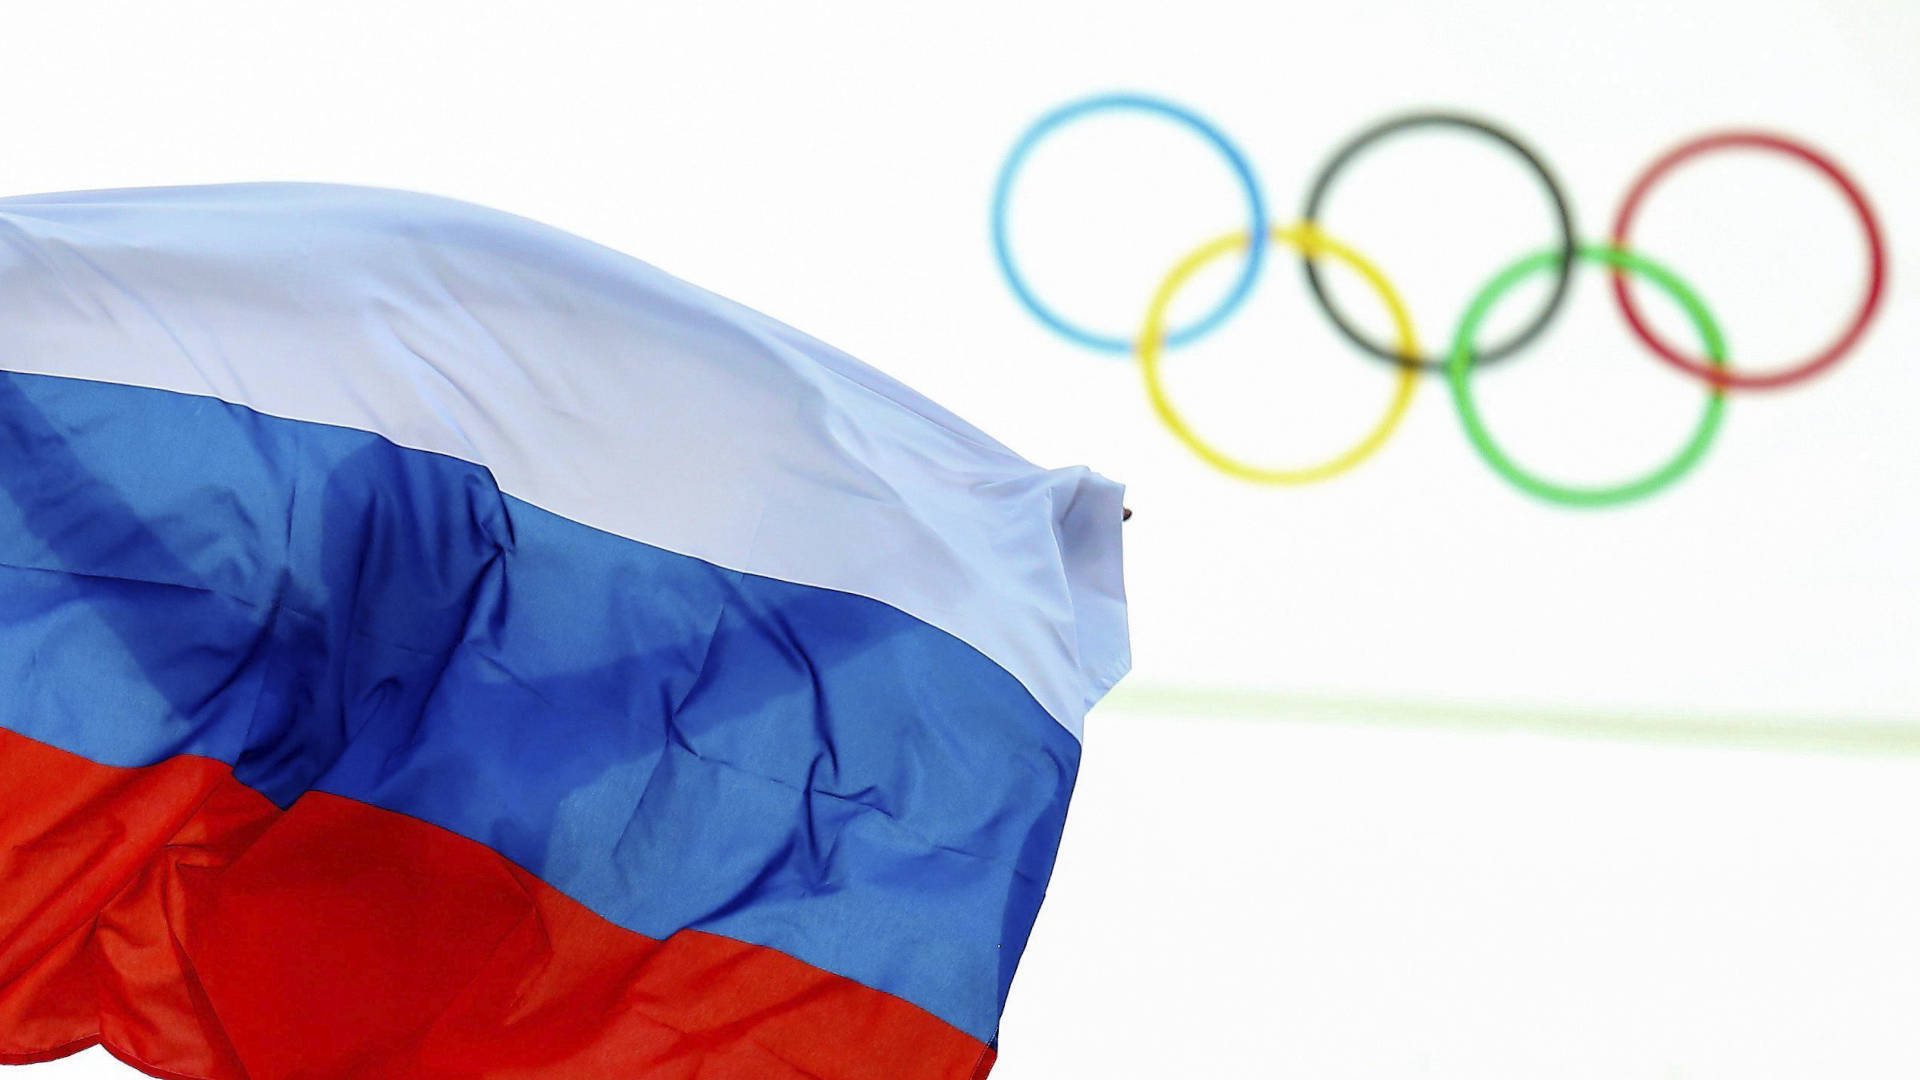 Russian flag and Olympic rings.